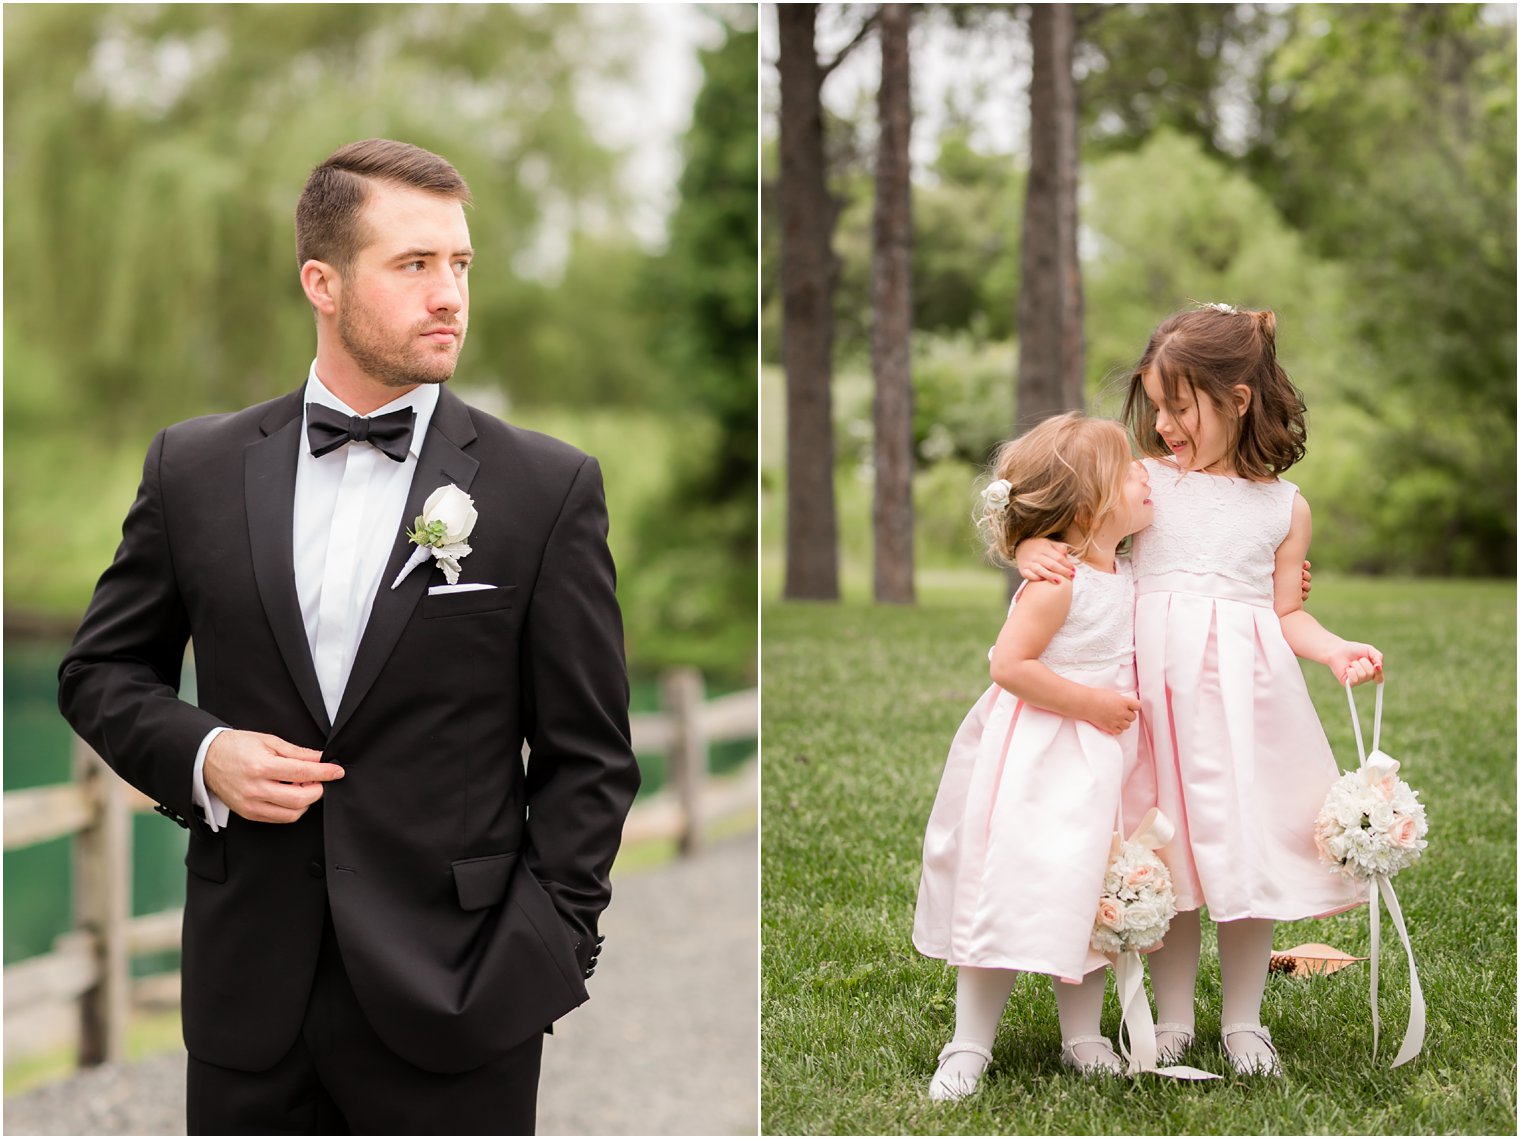 Flower girls in pink dresses | Photos by Idalia Photography